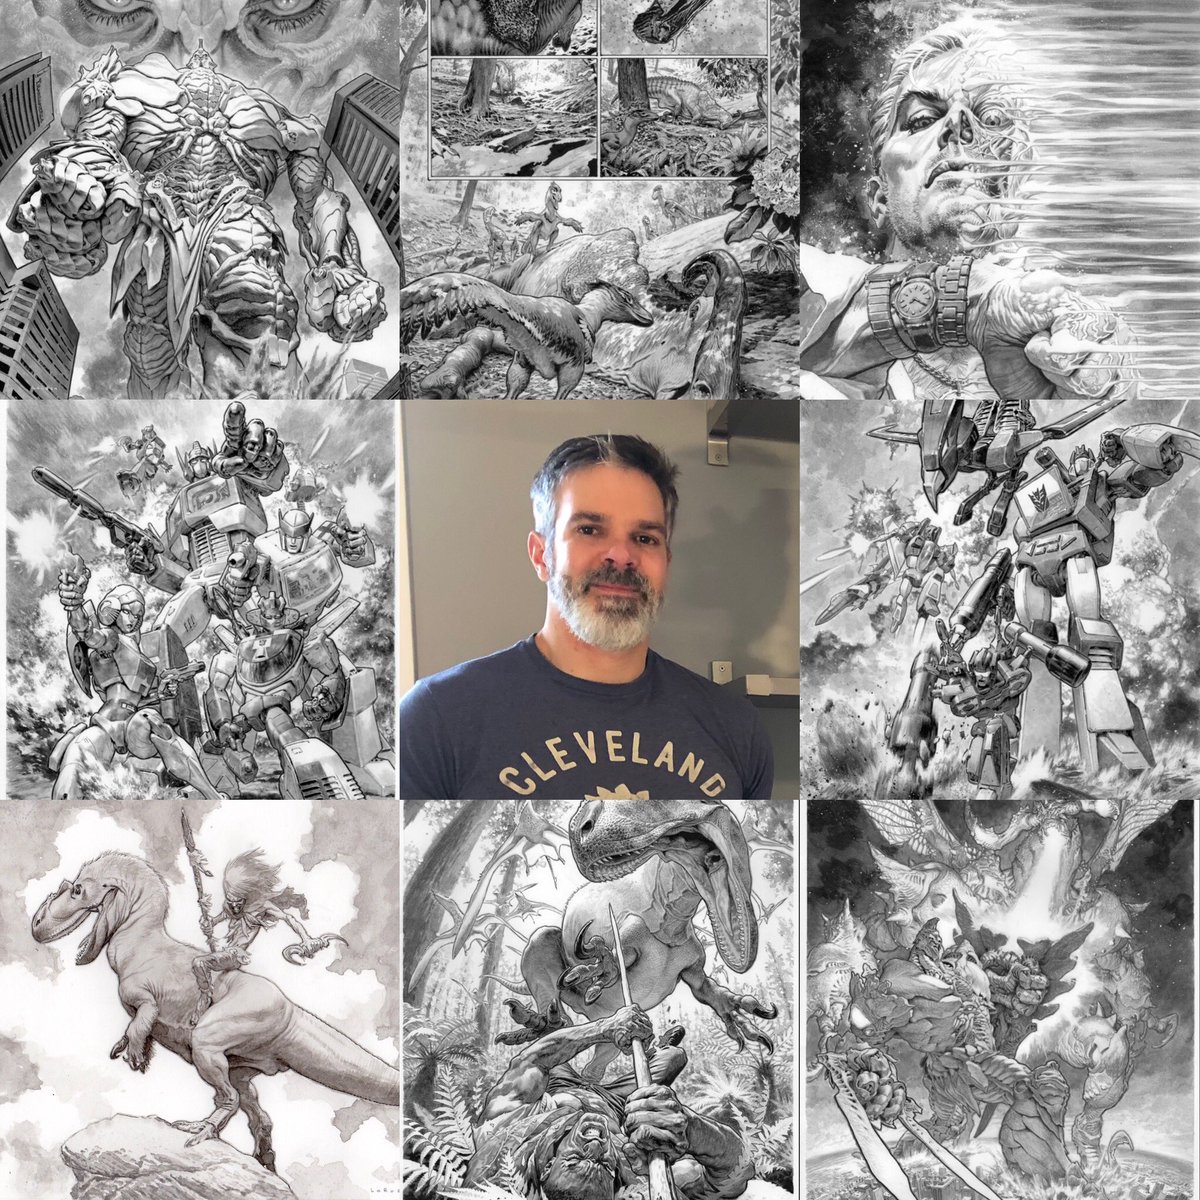 #artvsartist2023 thanks for all the support guys, hope everyone’s doing ok!